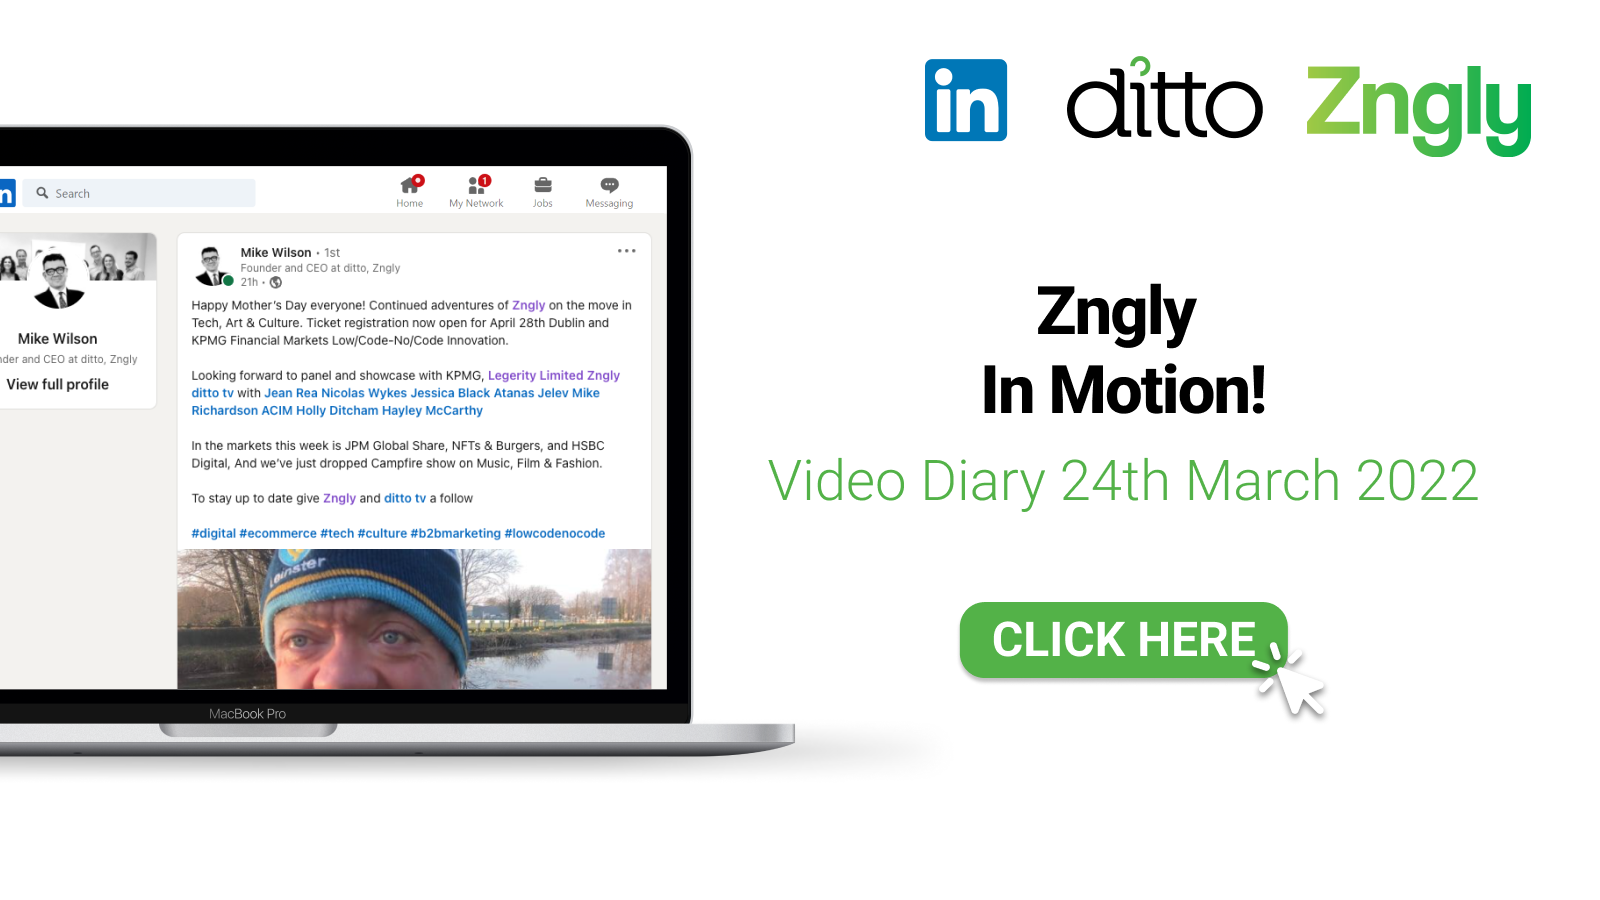 Zngly In Motion!